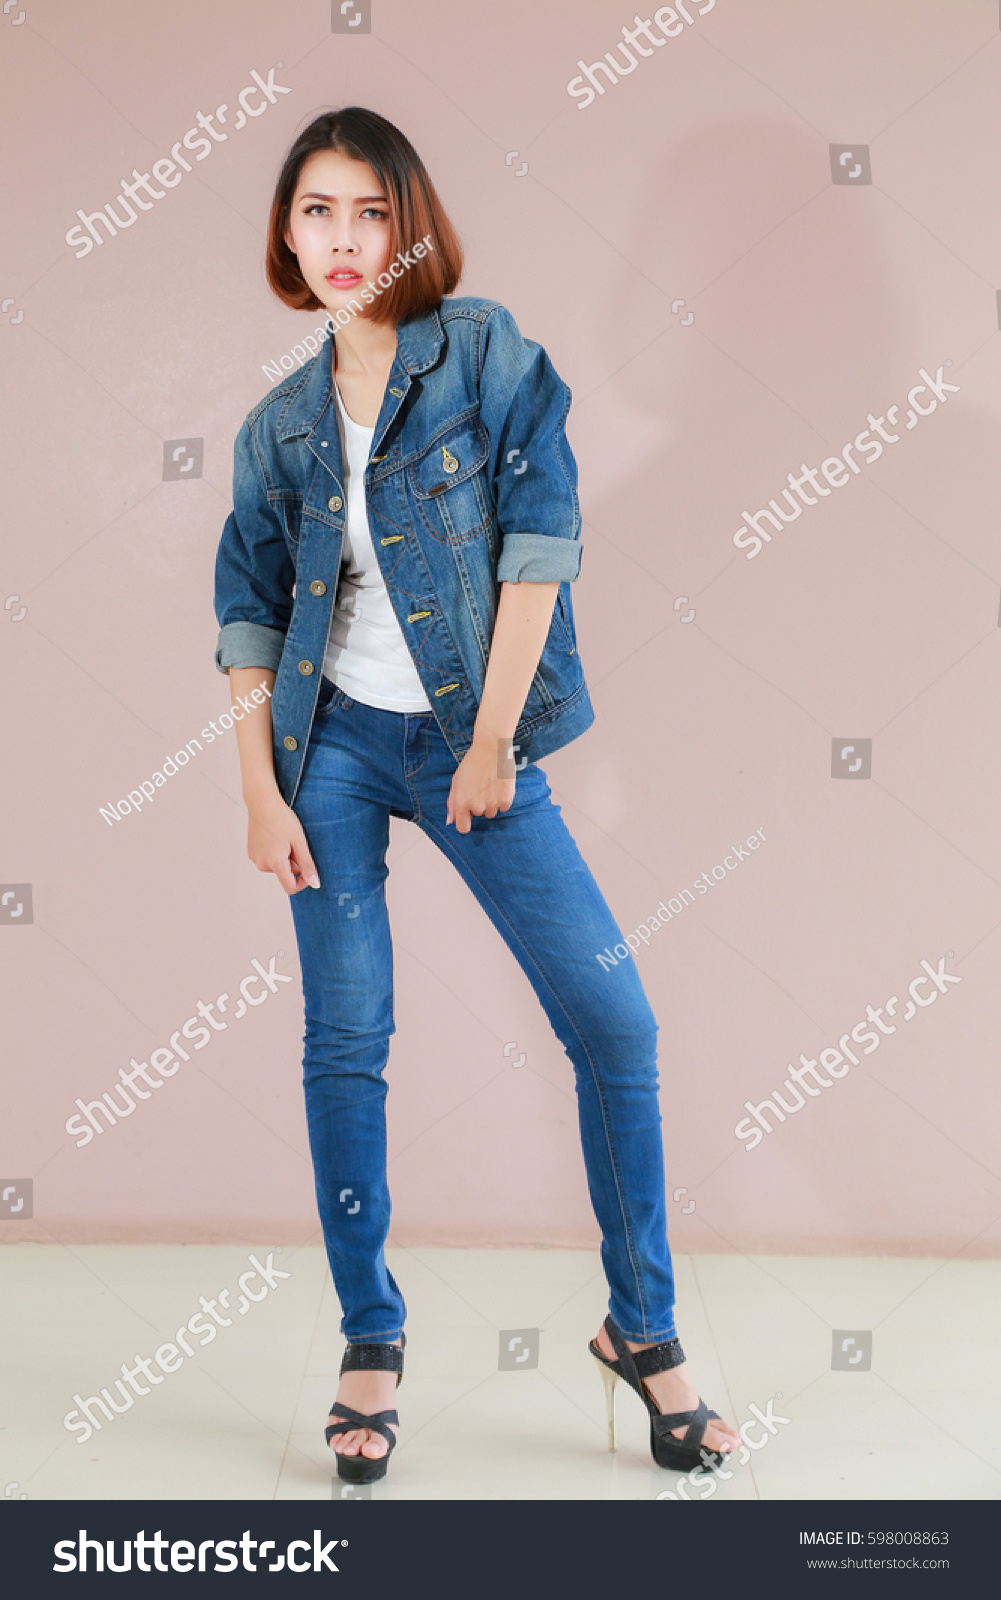 Asian Woman Casual Outfits Standing Jeans Stock Photo 598008863 |  Shutterstock